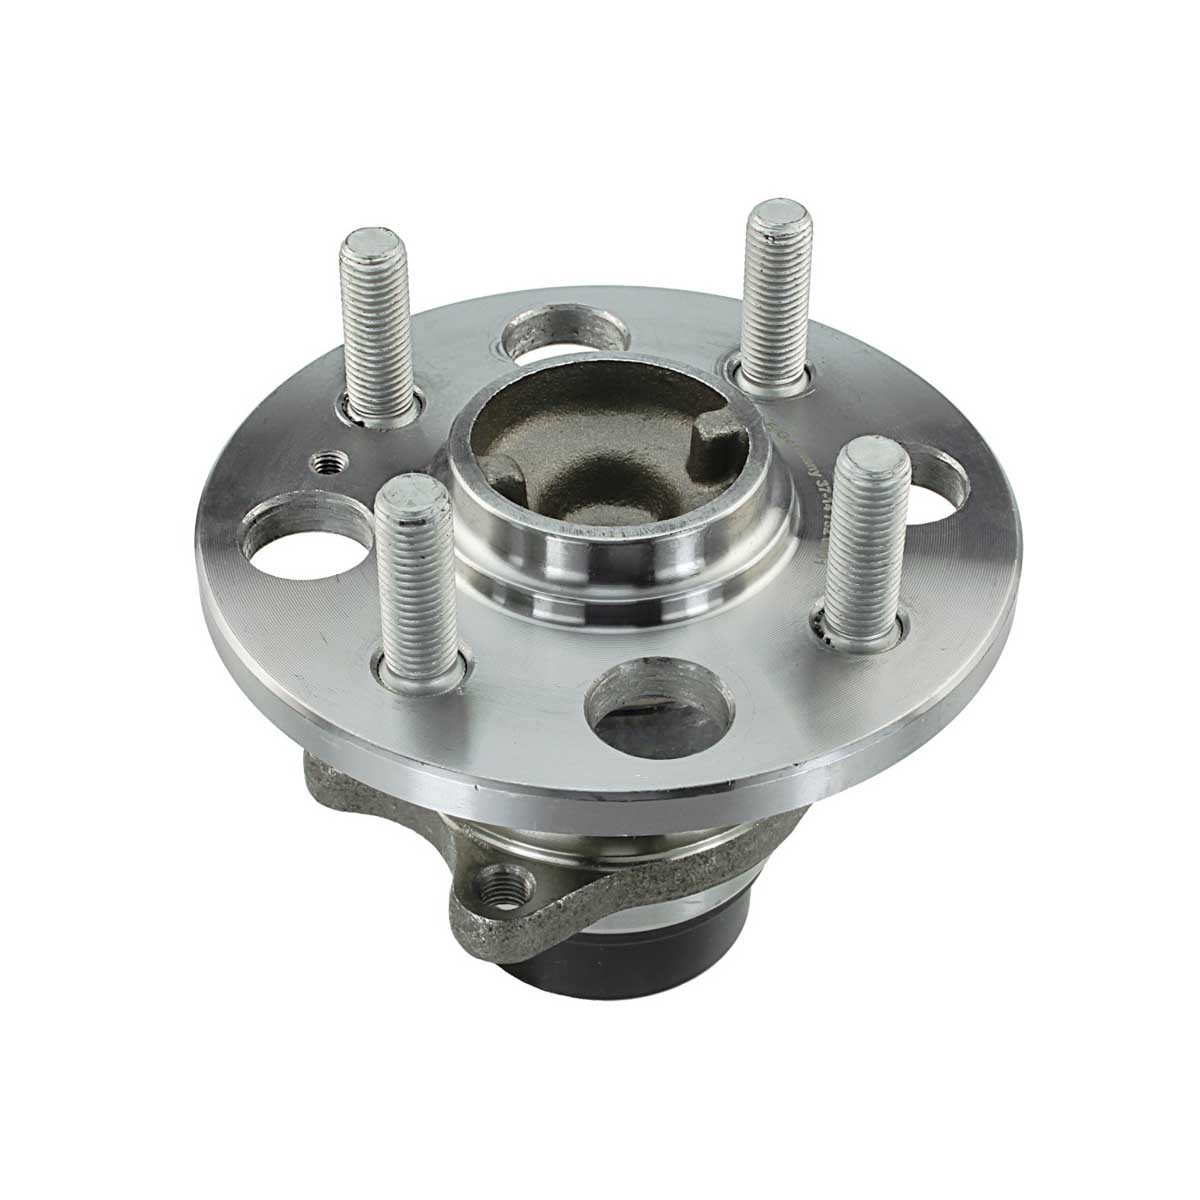 MEYLE 37-14 752 0001 Wheel bearing kit Rear Axle, ORIGINAL Quality, with integrated ABS sensor, with integrated wheel bearing, 140 mm, Ball Bearing